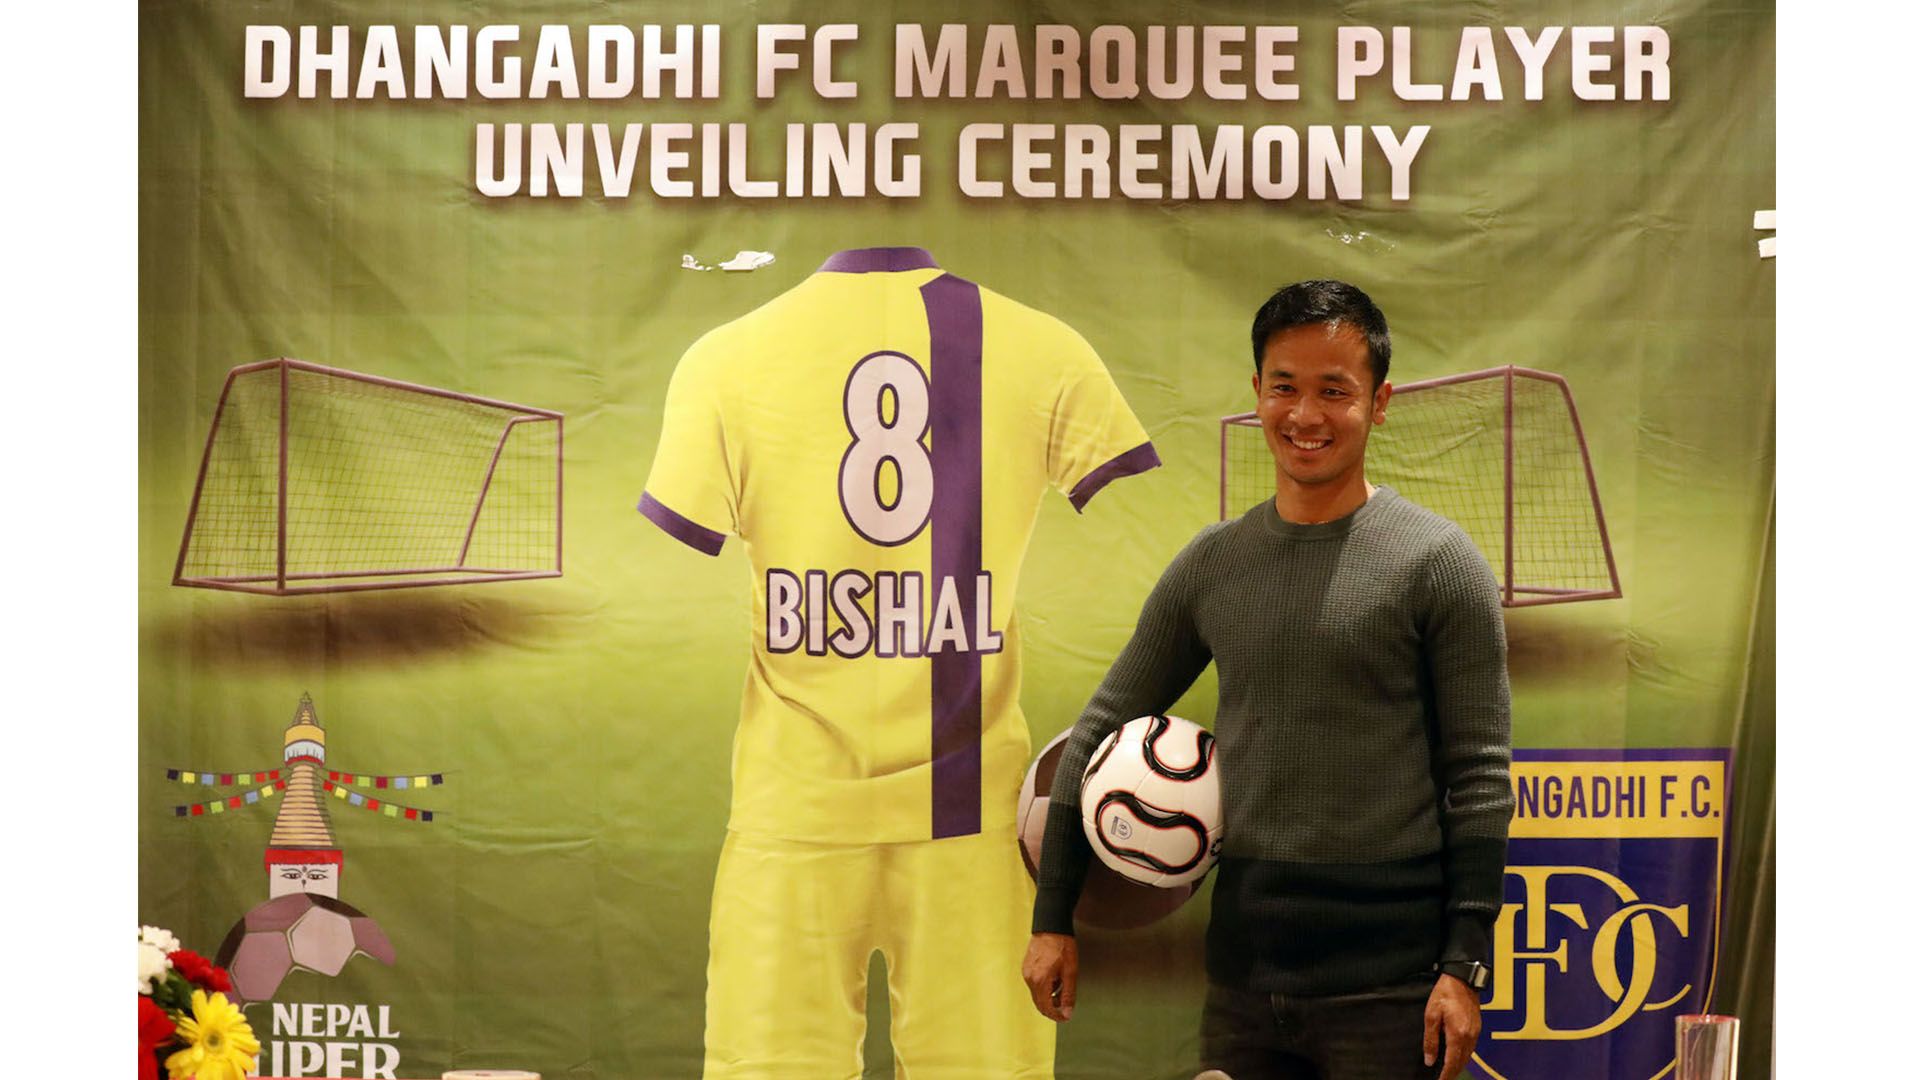 Bishal marquee player in Dhangadhi FC